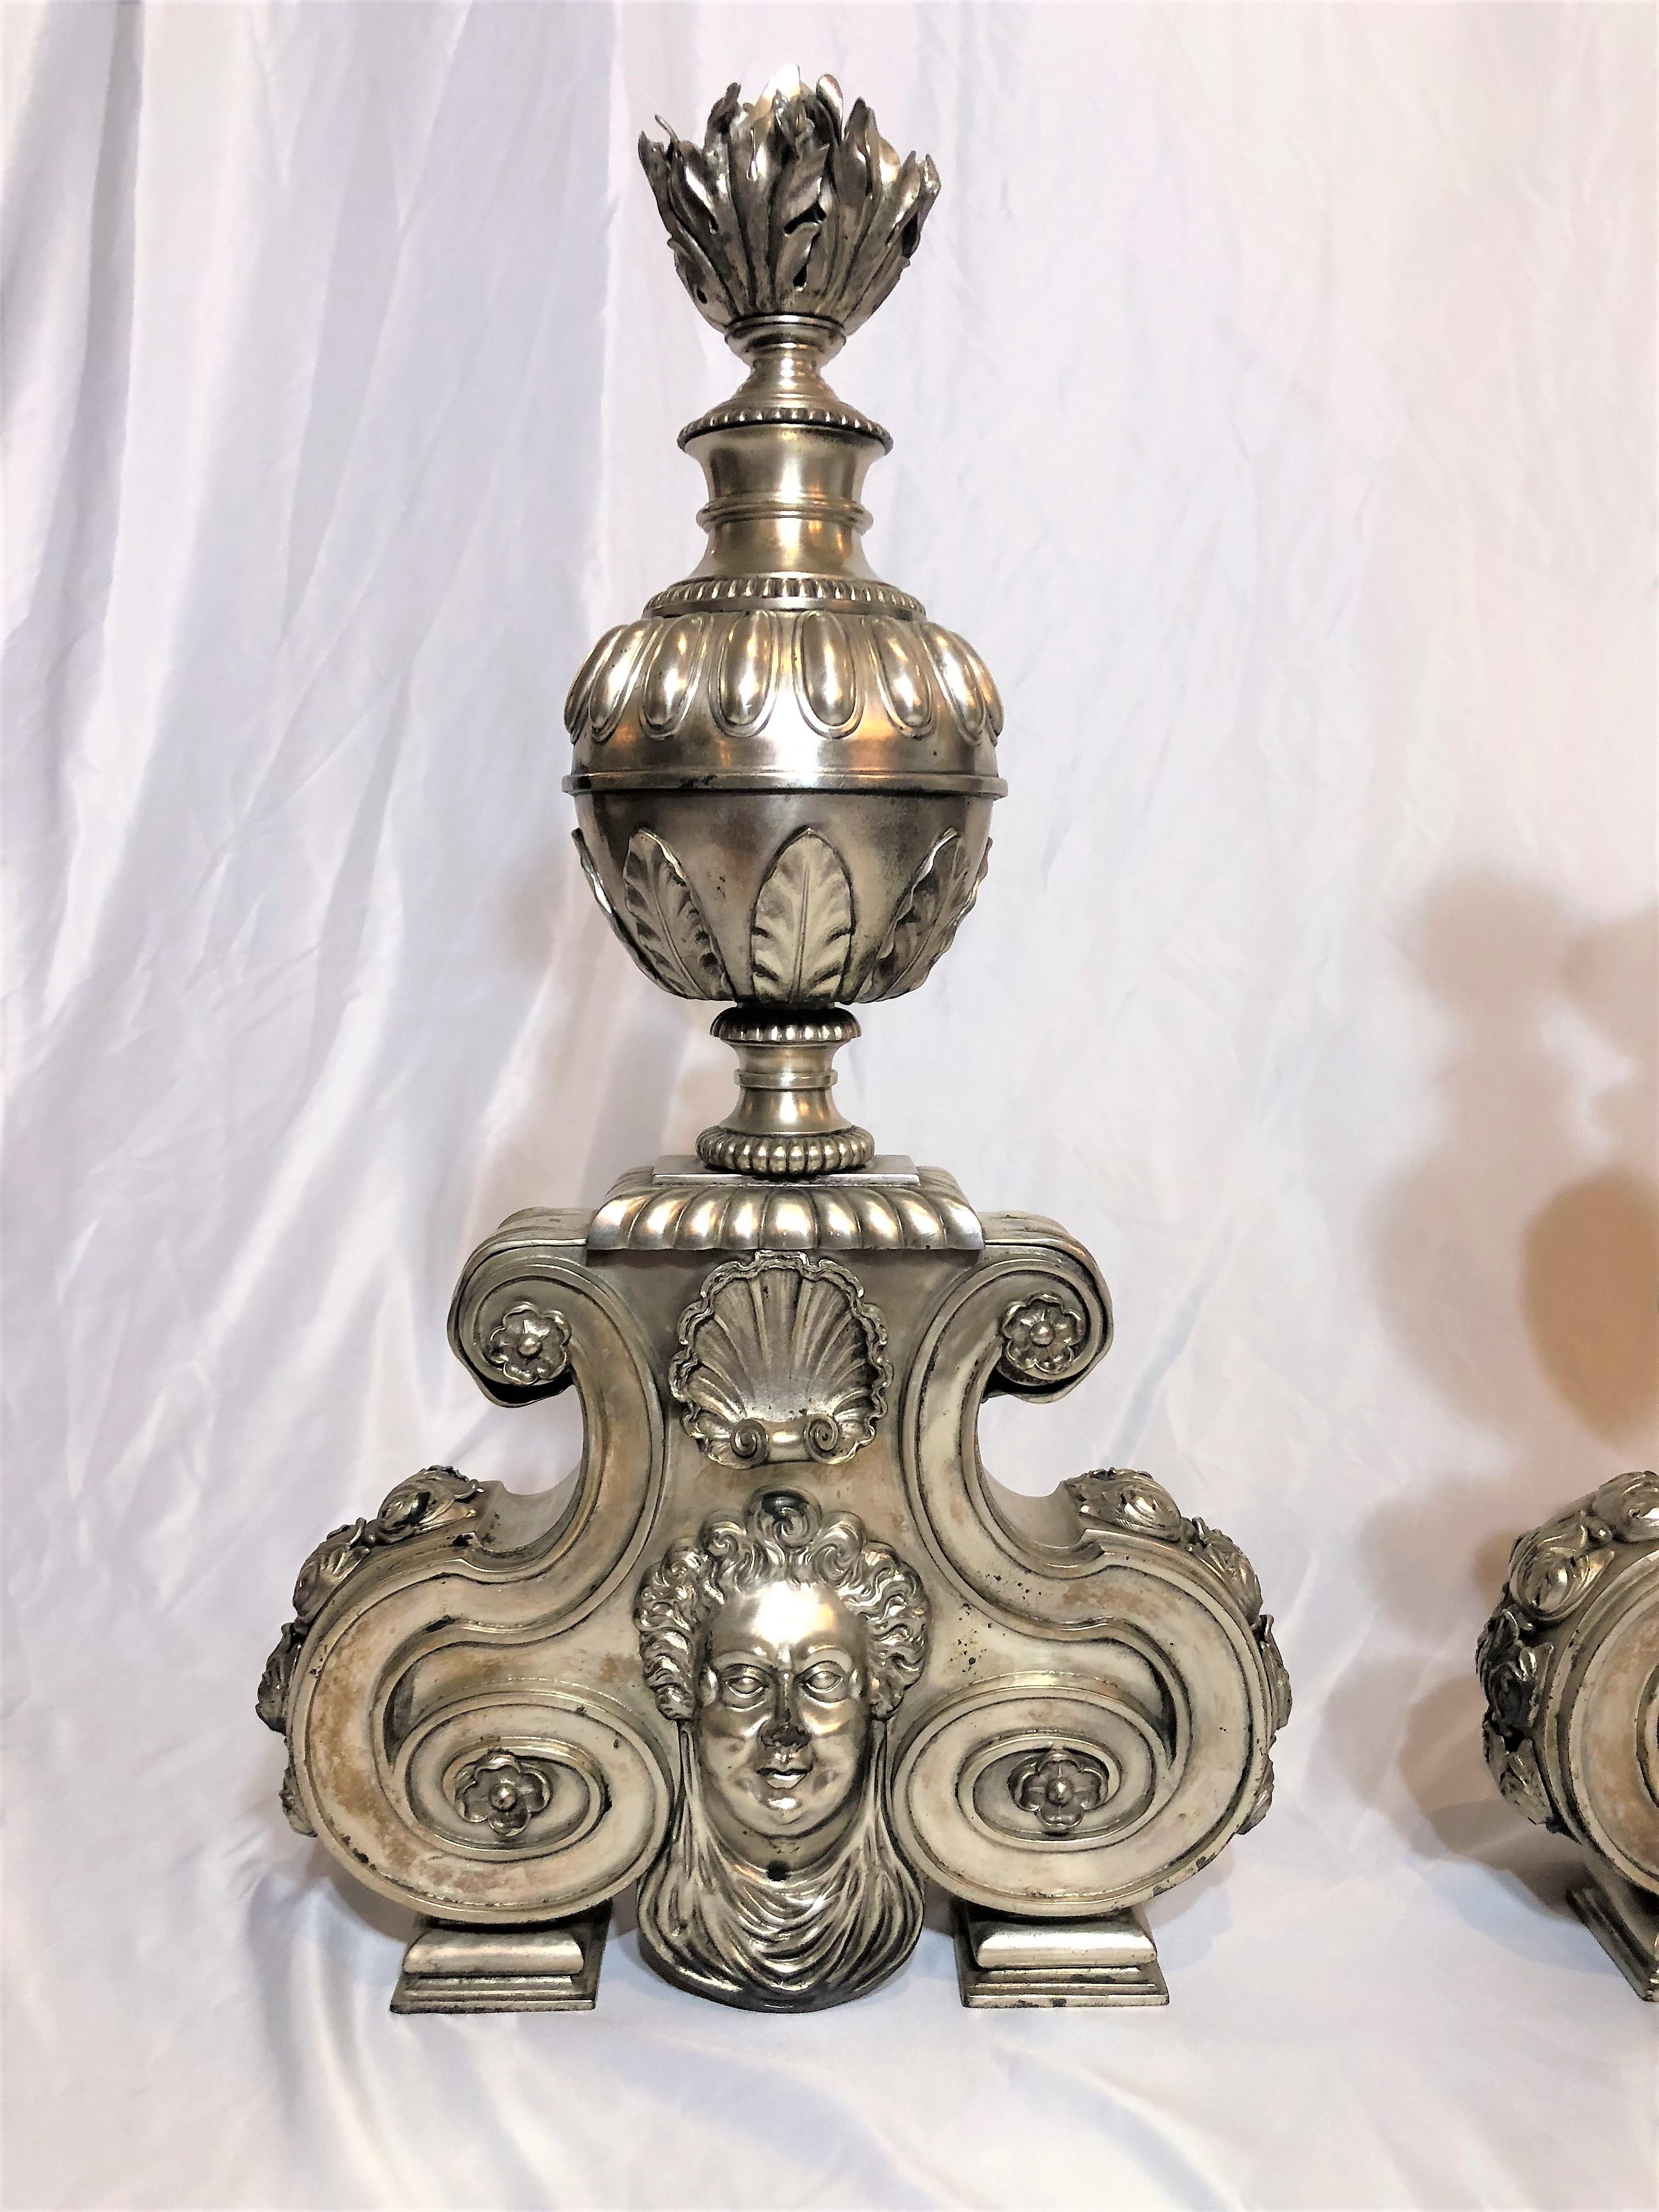 These andirons have been silvered, so they are slightly different than the traditional bronze d'ore ones our shop usually carries. They are handsome and will make a statement in any setting.